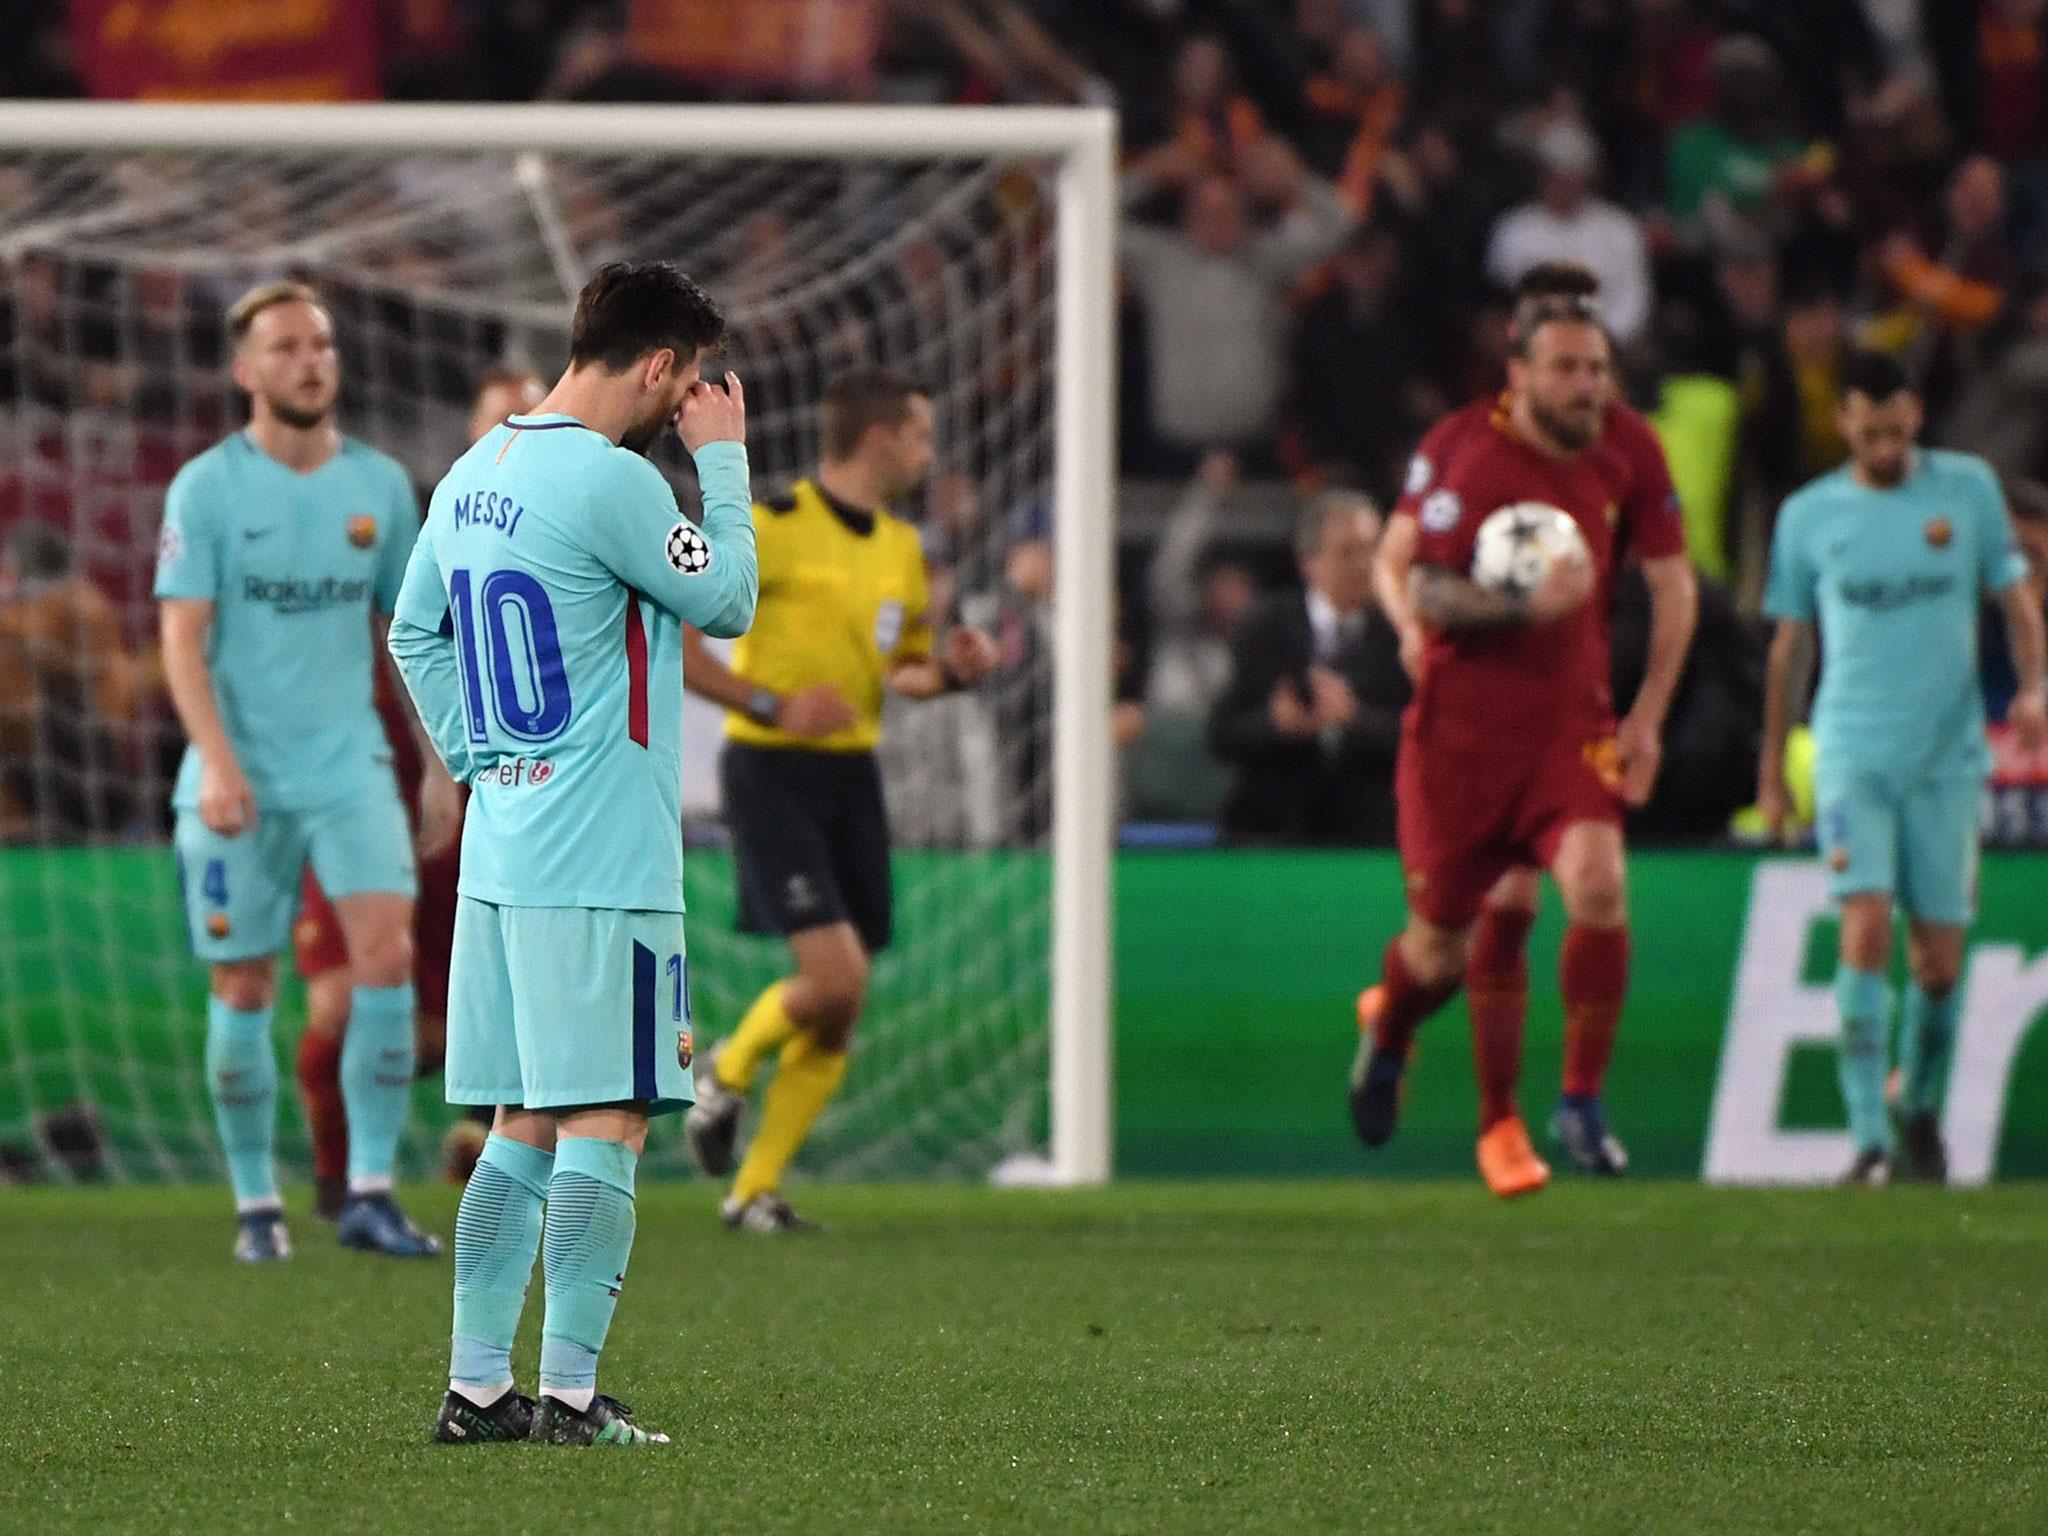 &#13;
Lionel Messi could not prevent his side’s shock defeat &#13;